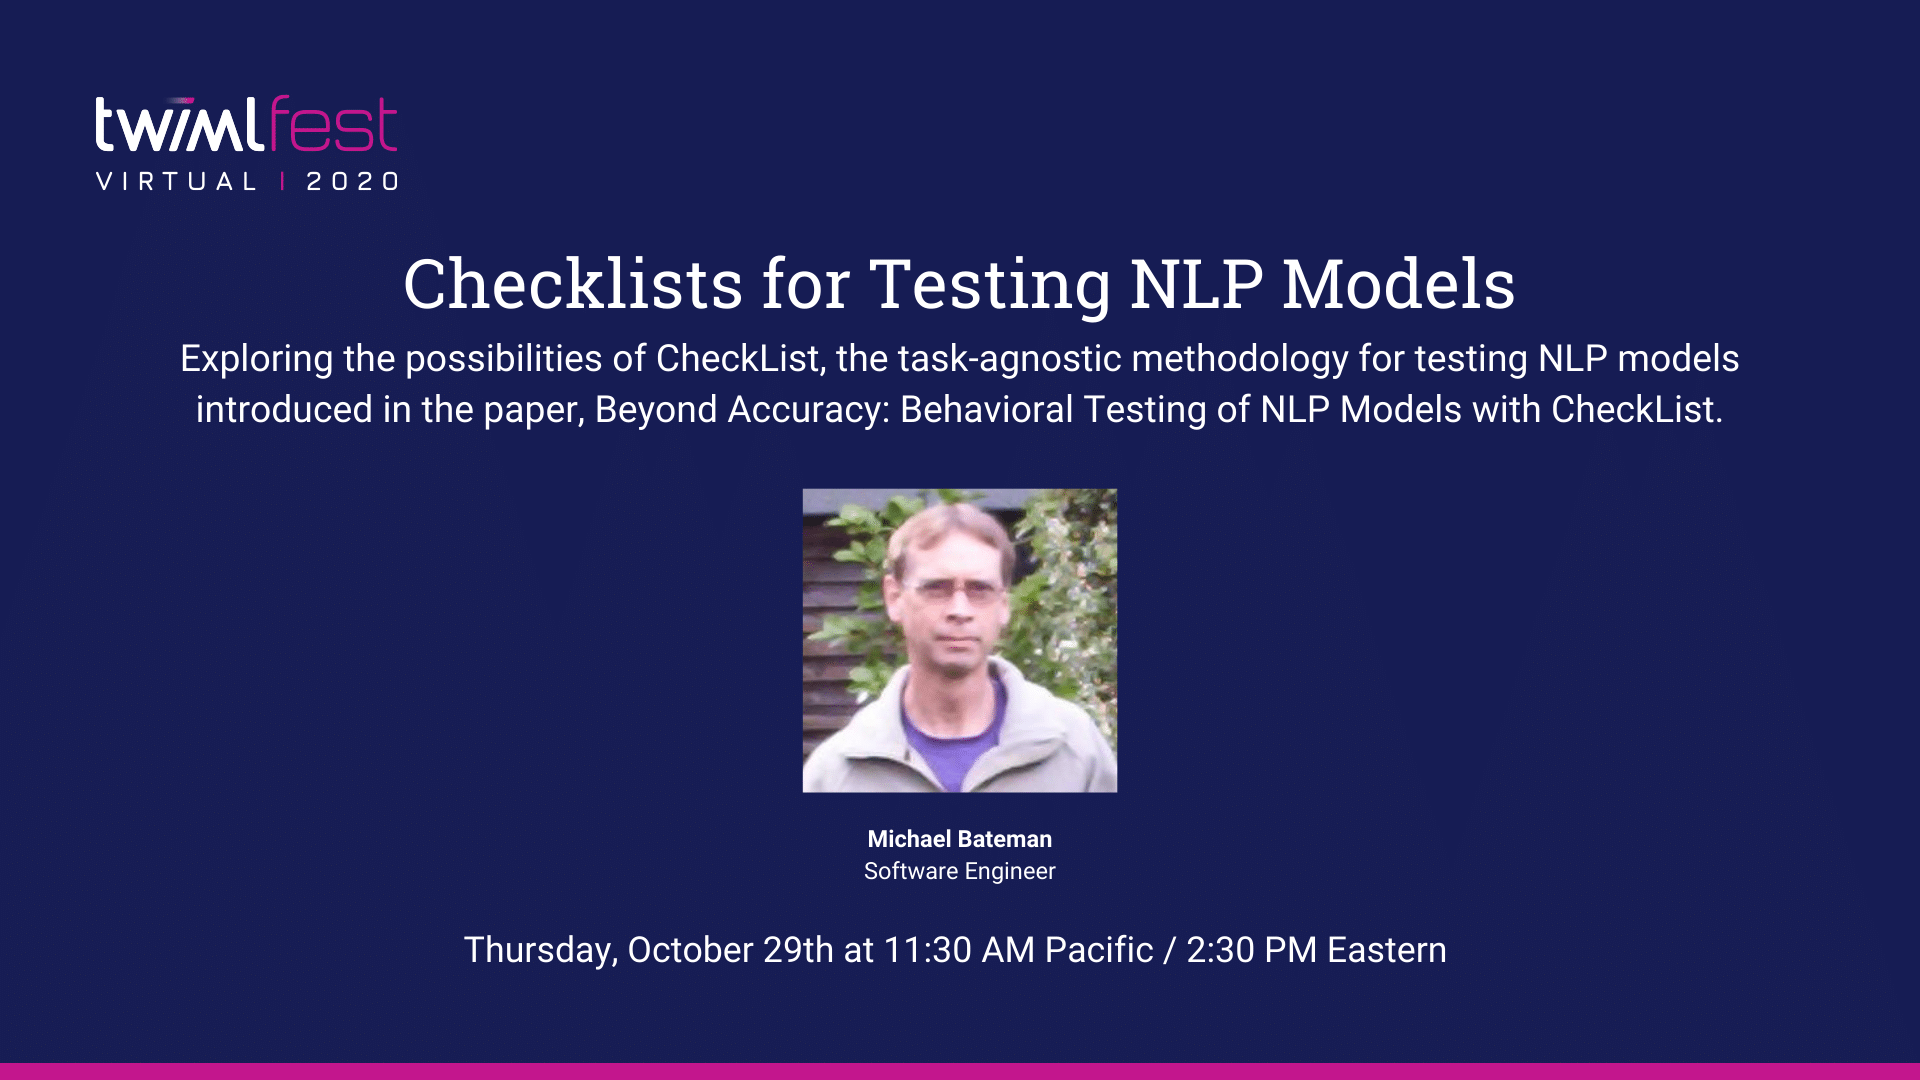 Checklists for Testing NLP Models